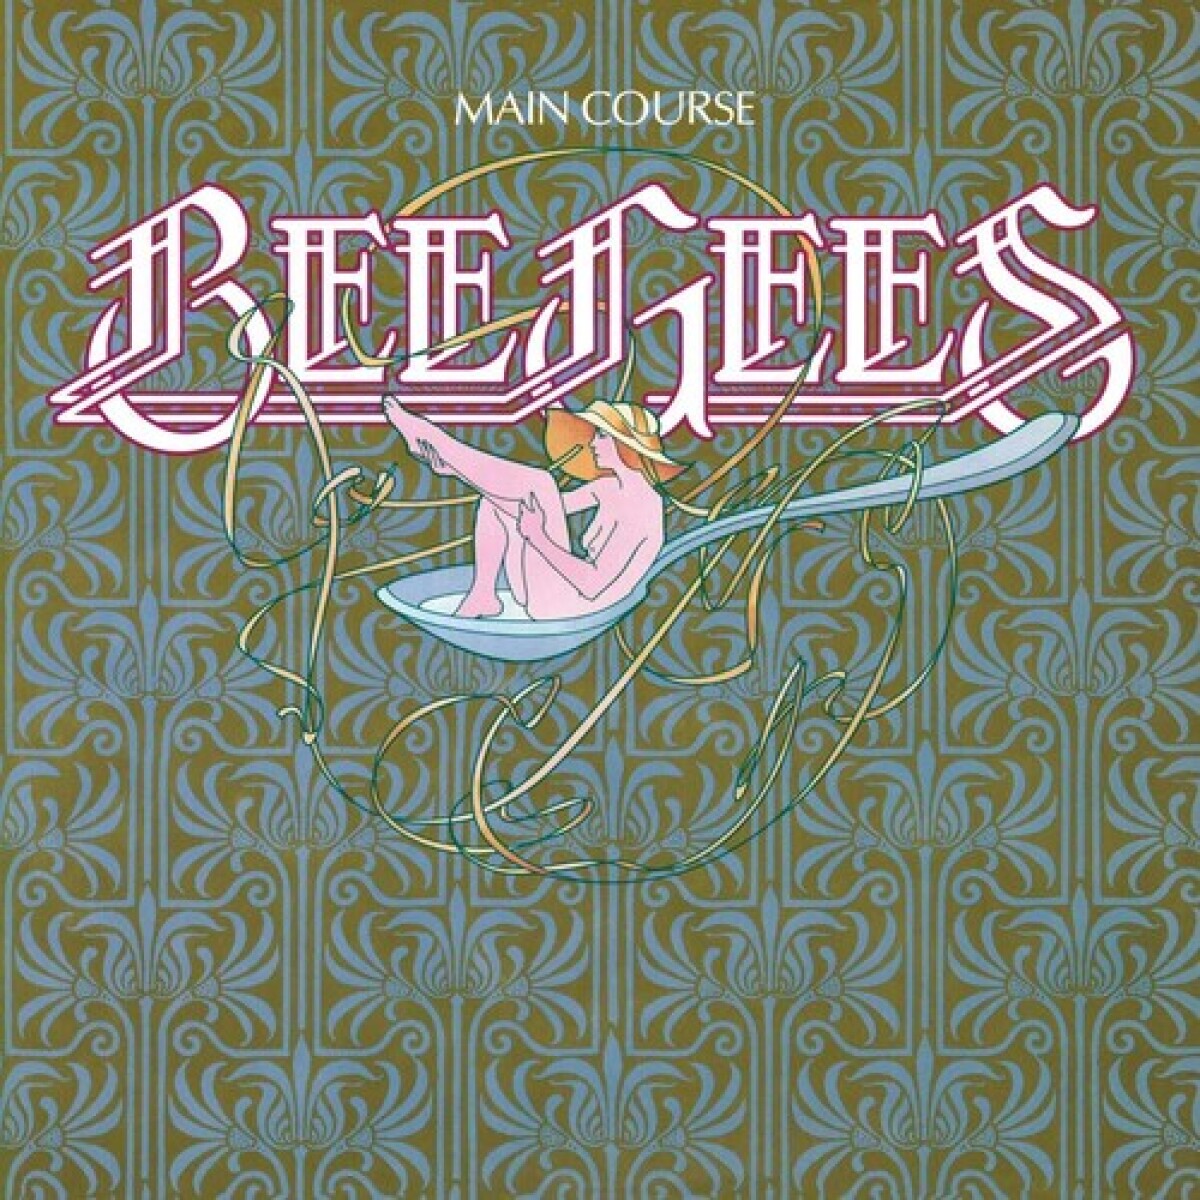 (l) Bee Gees - Main Course - Vinilo 